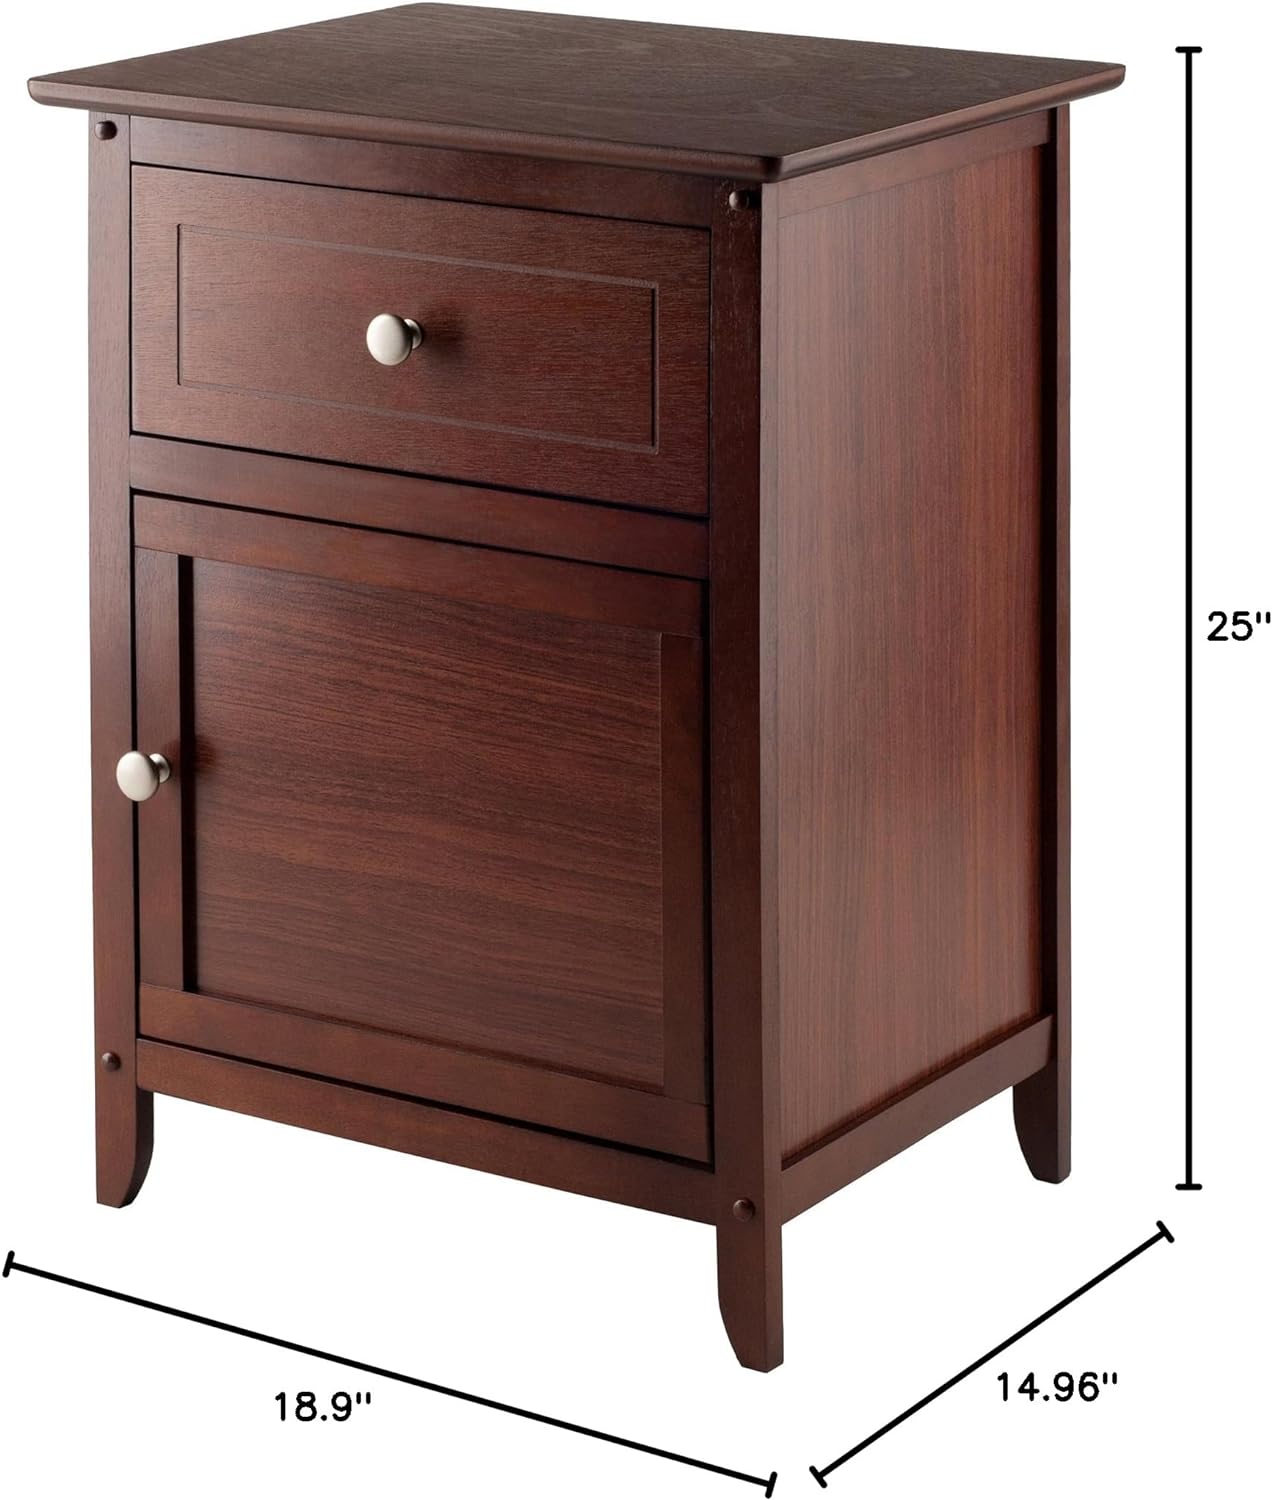 wooden cabinet in walnut color with dimensions as part of a product description